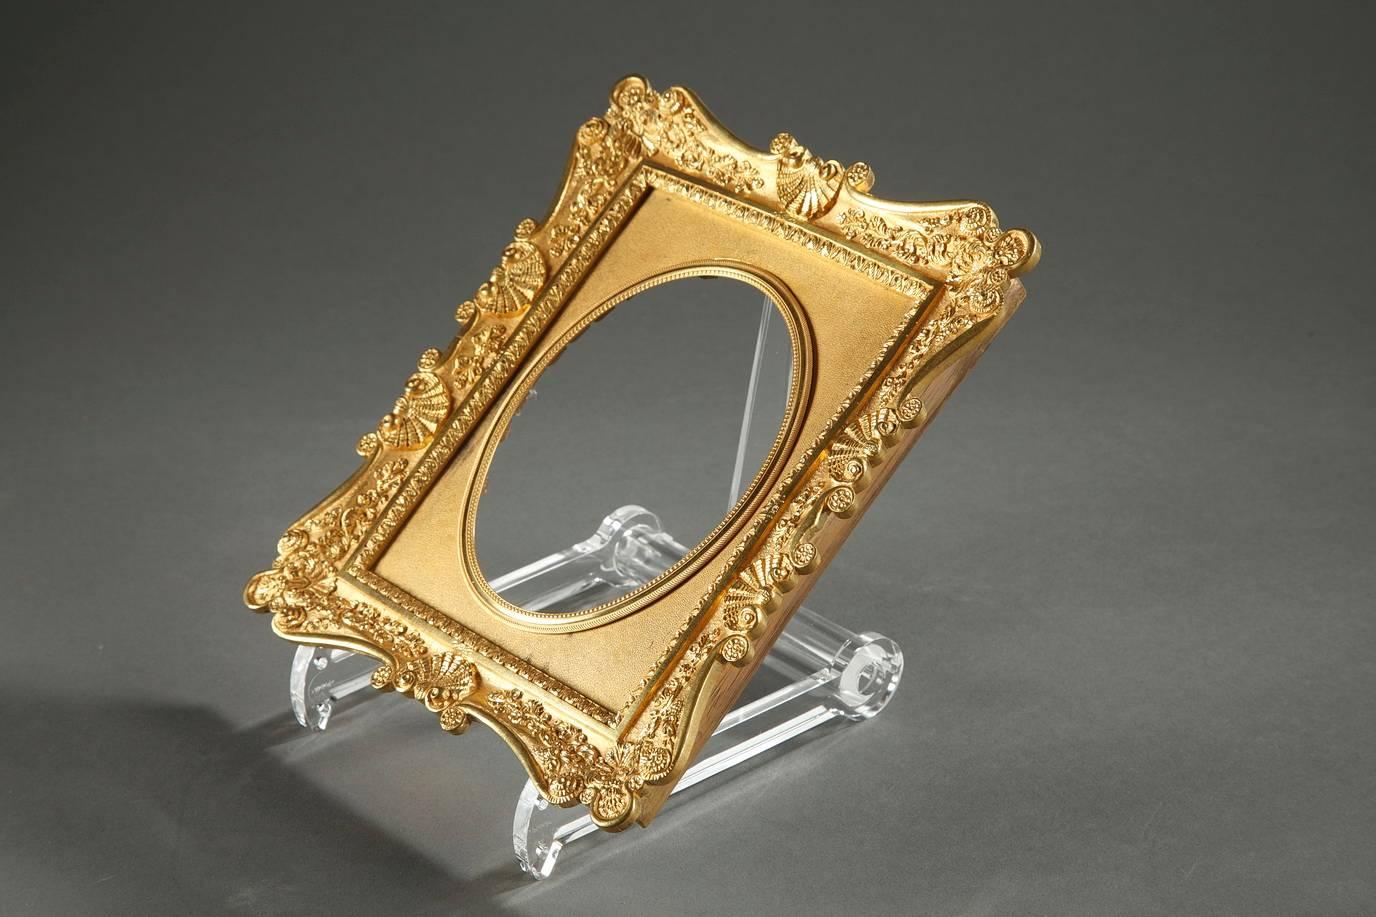 Gilt bronze frame with curved sides, very intricately sculpted with shells, flowery palmettes, small flowers and foliage. Very beautiful chasing,
 
circa 1860.

Dim: W: 6.3 in - D: 1.2in - H: 7.9in.
Dim: L: 16cm, P: 3cm, H: 20cm.